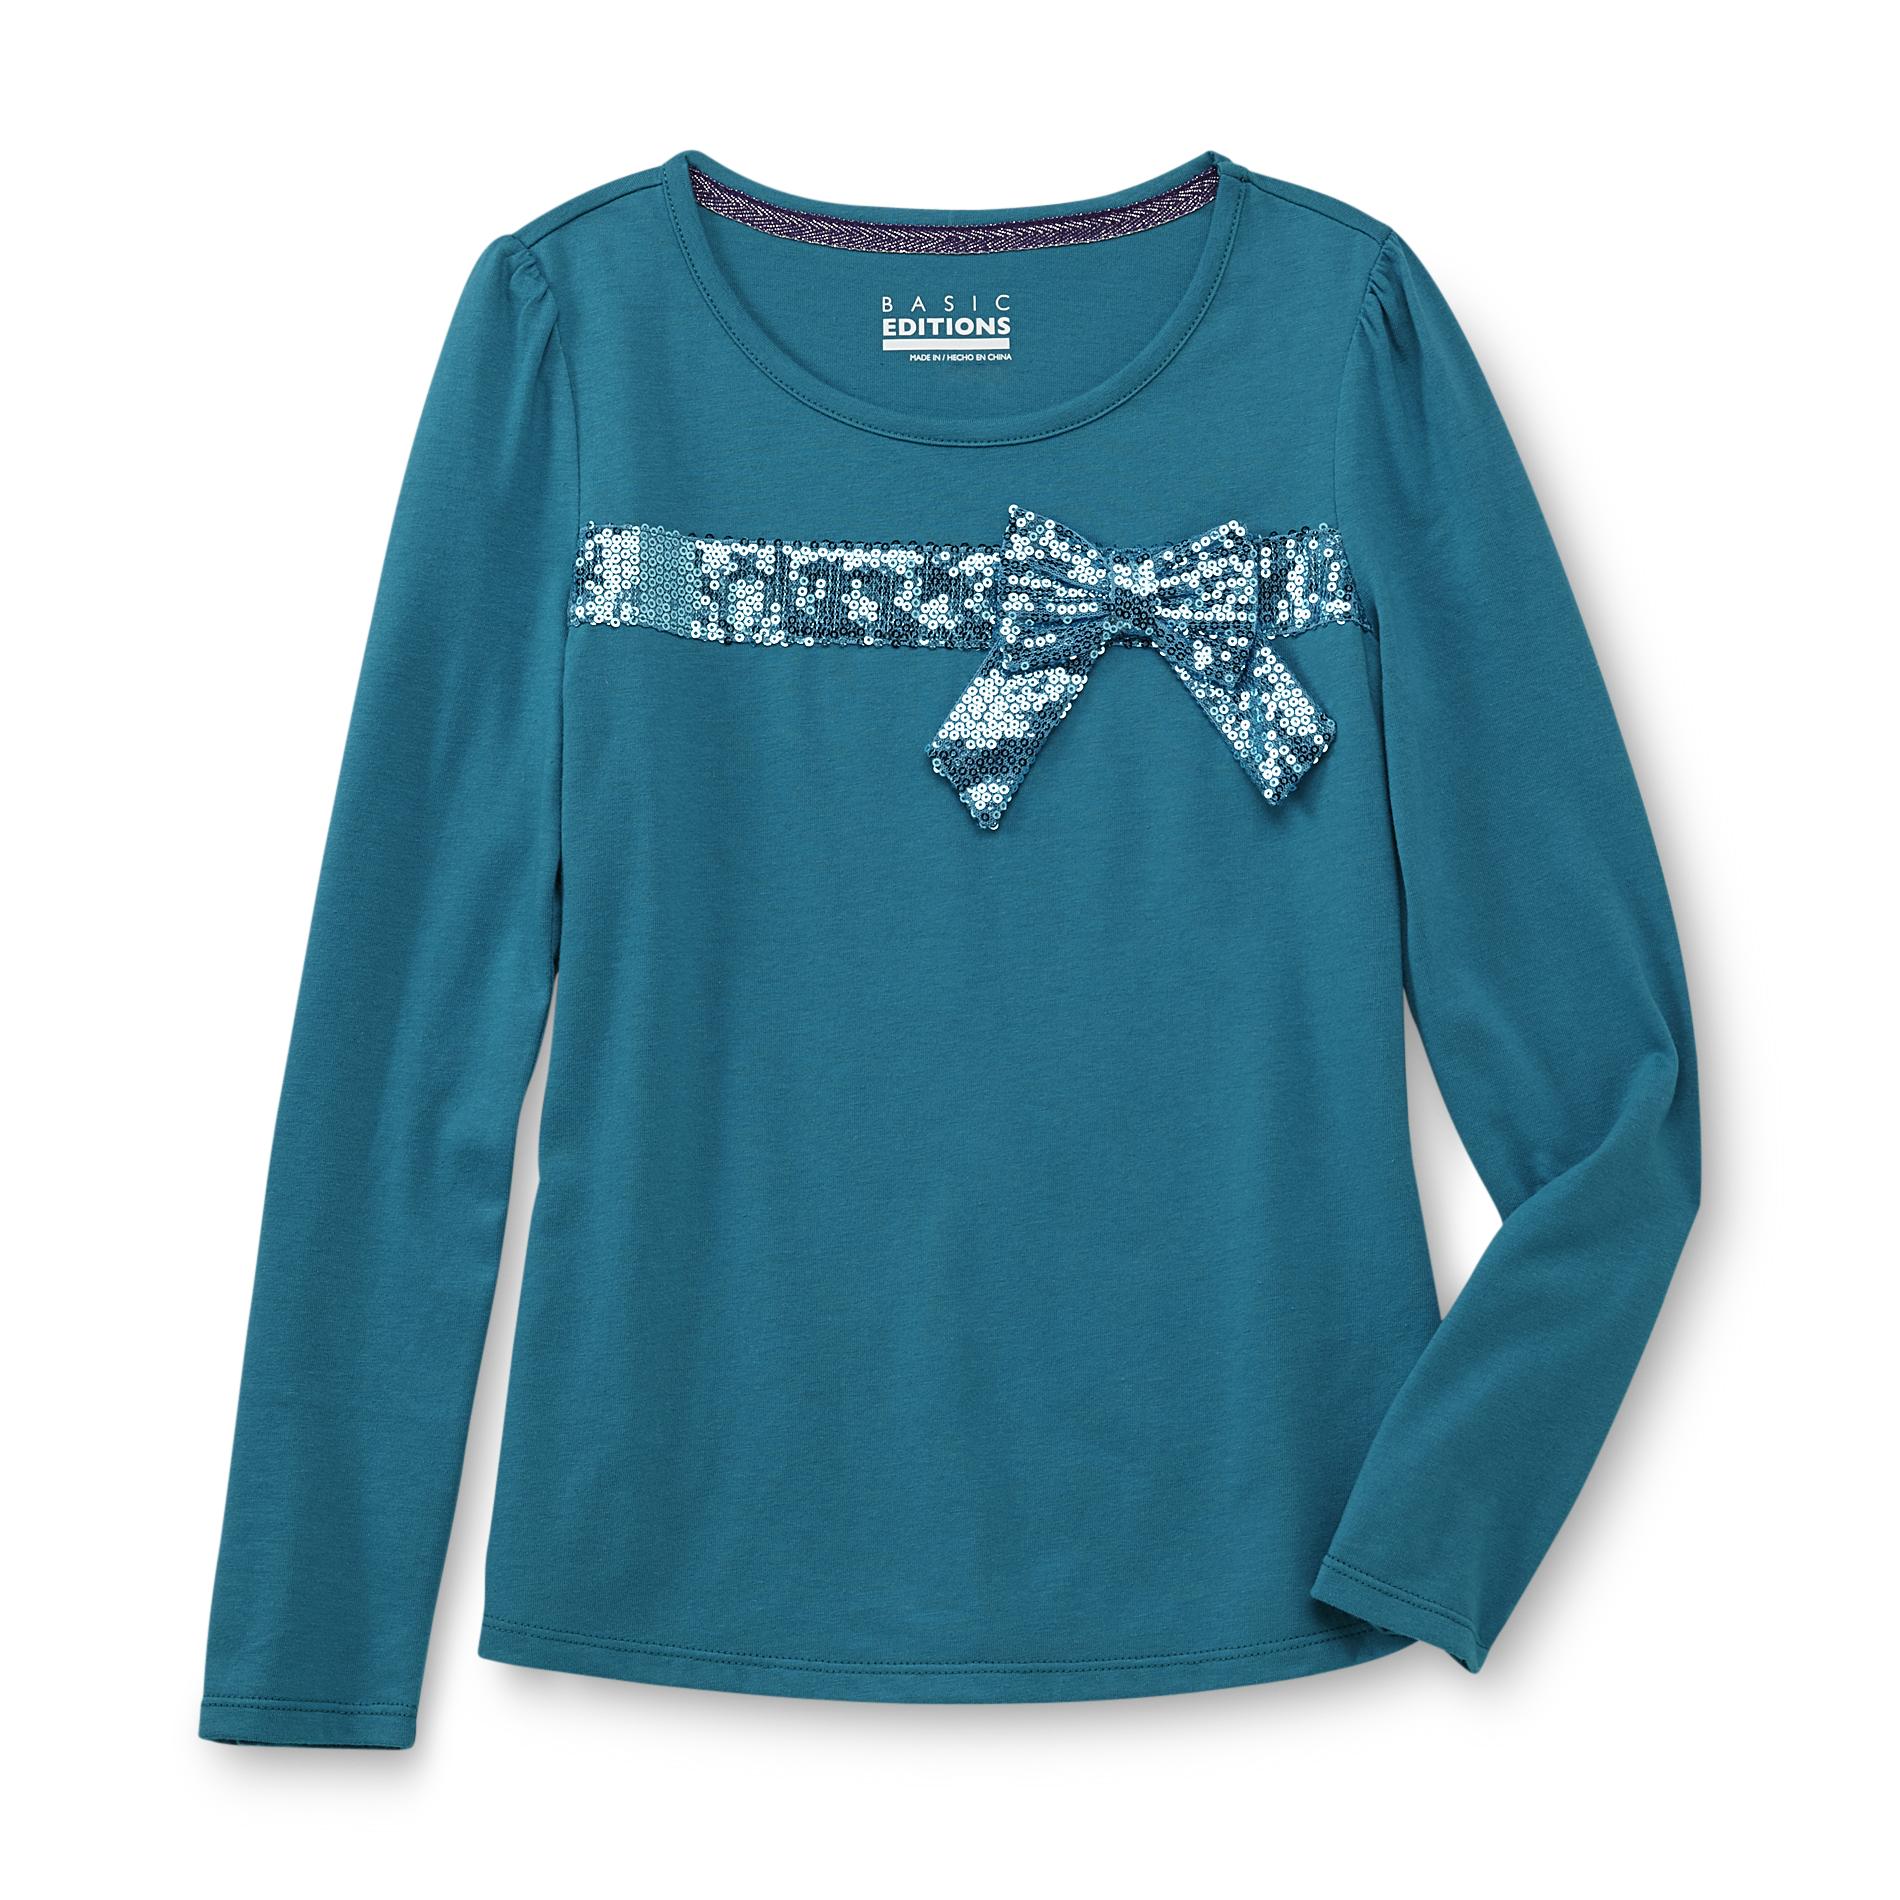 Basic Editions Girl's Long-Sleeve T-Shirt - Sequined Bow